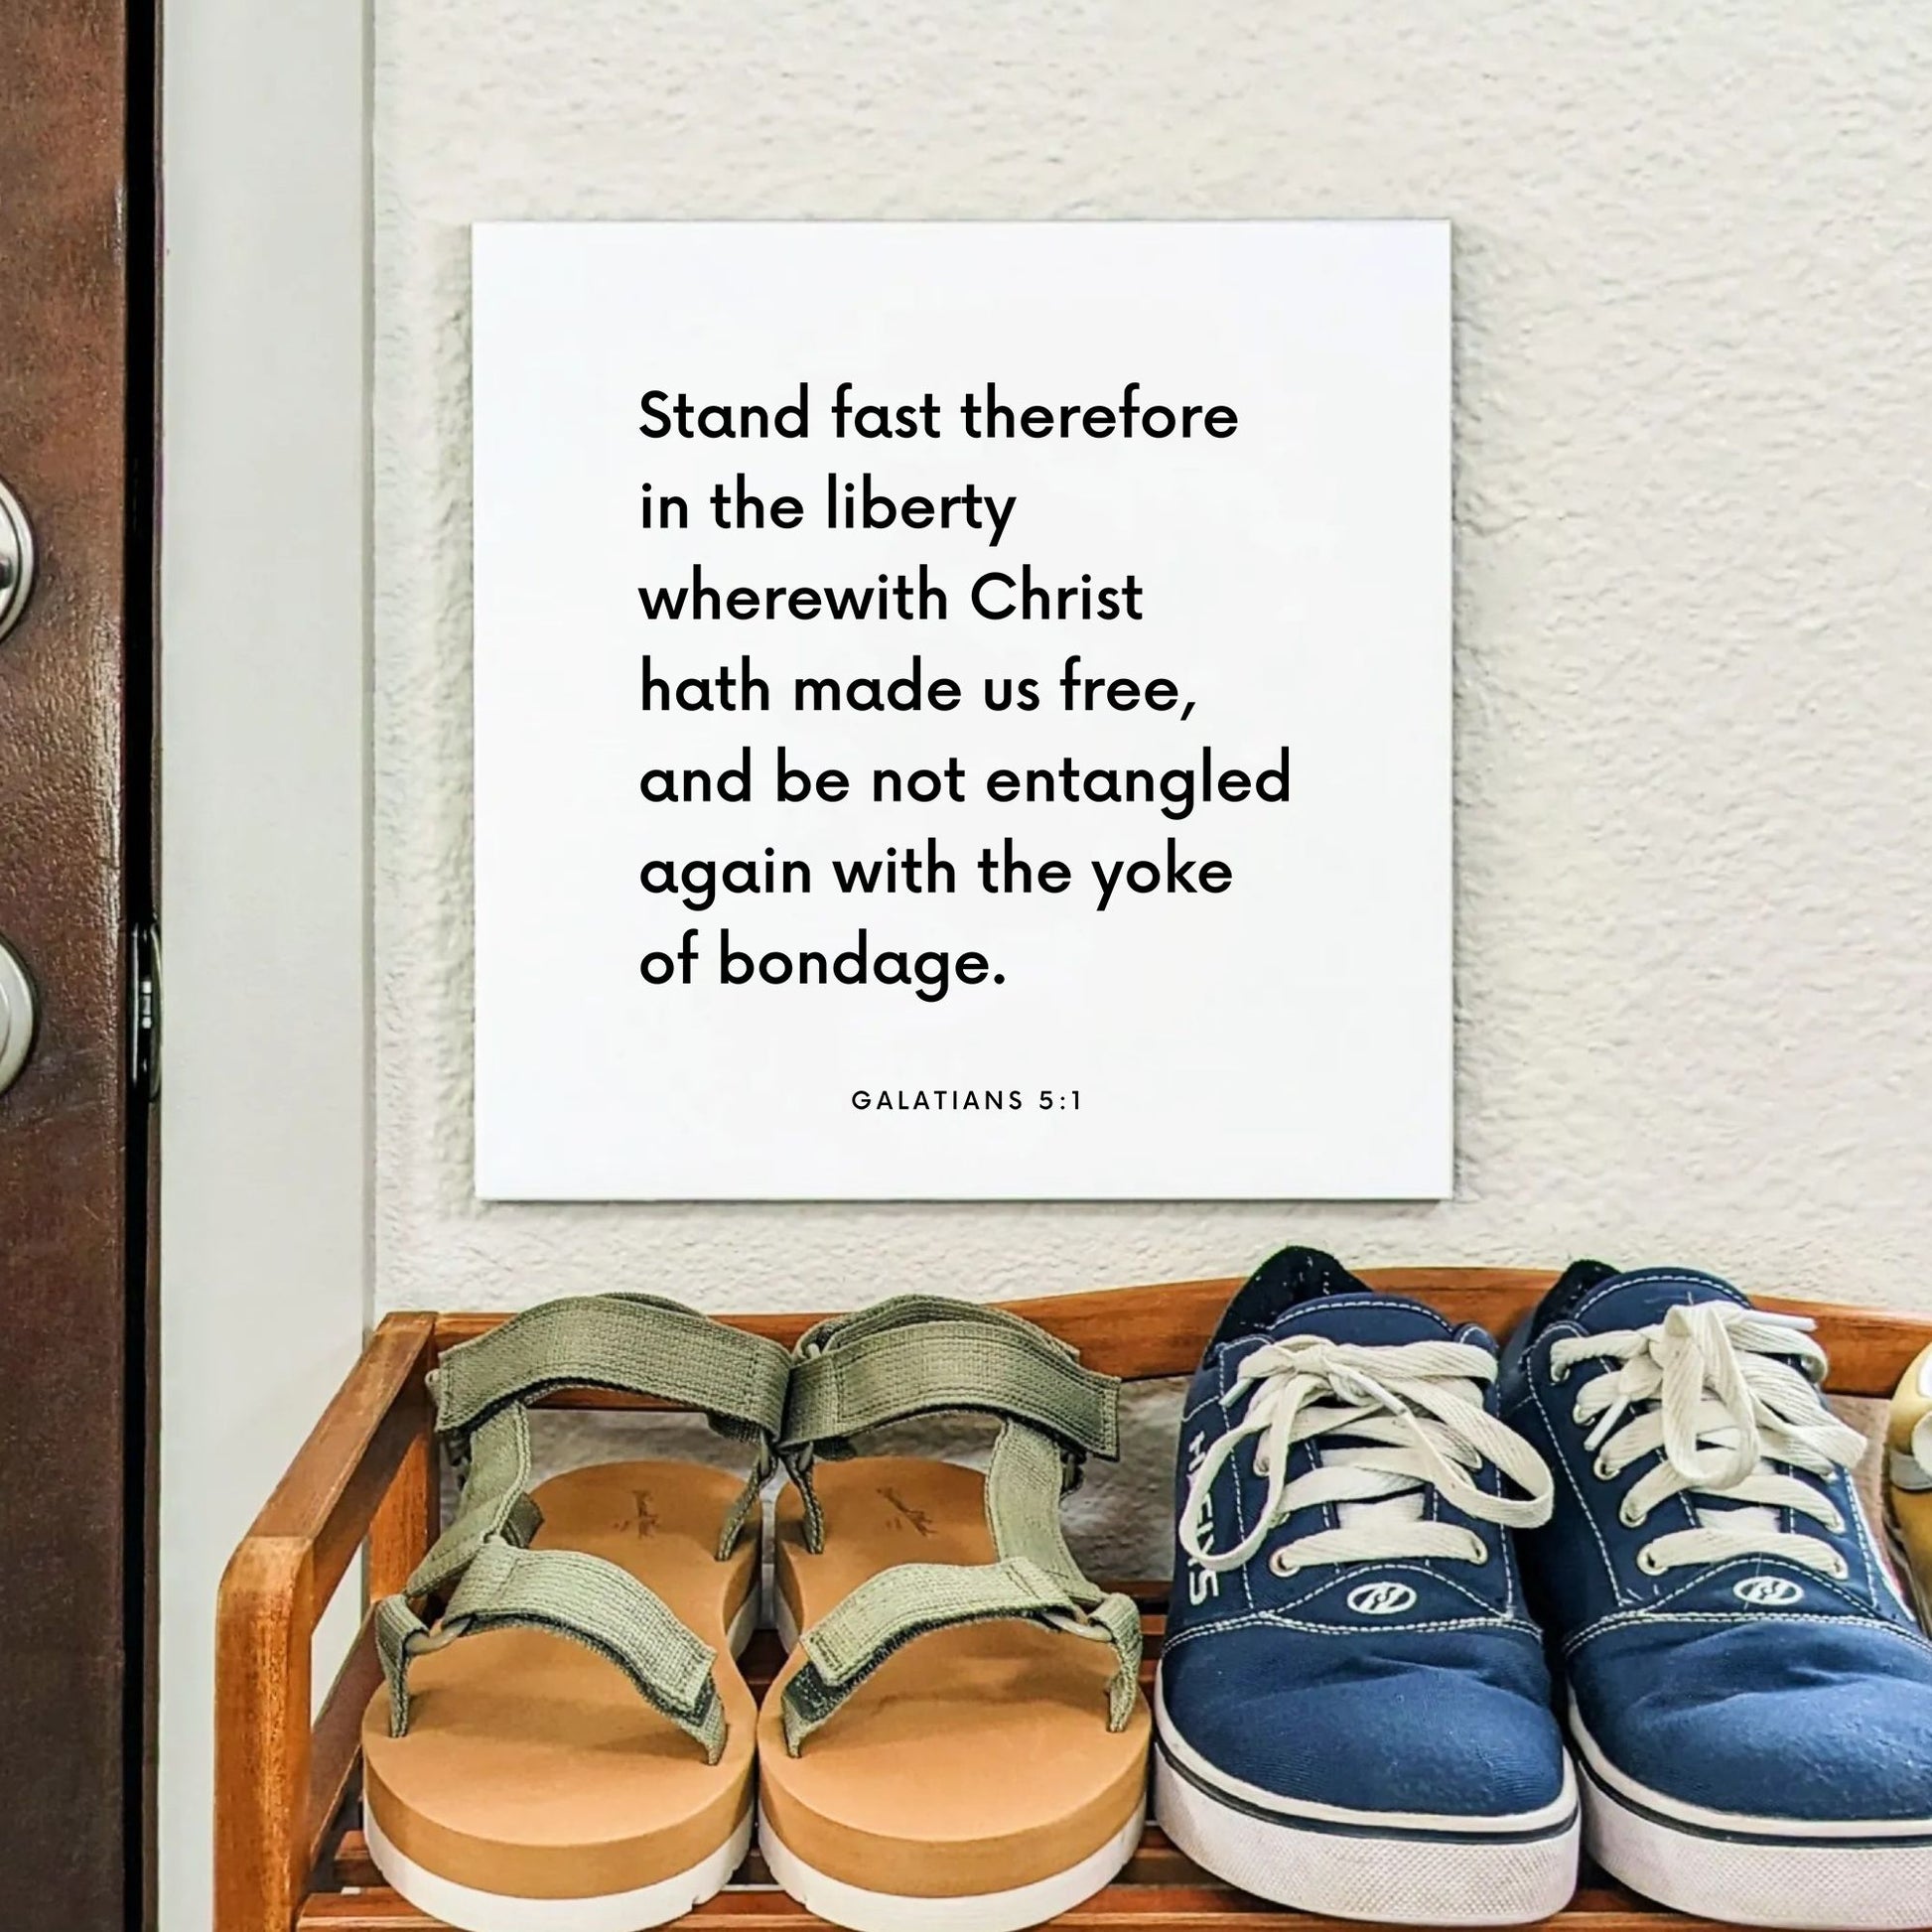 Shoes mouting of the scripture tile for Galatians 5:1 - "Stand fast in the liberty wherewith Christ hath made us free"